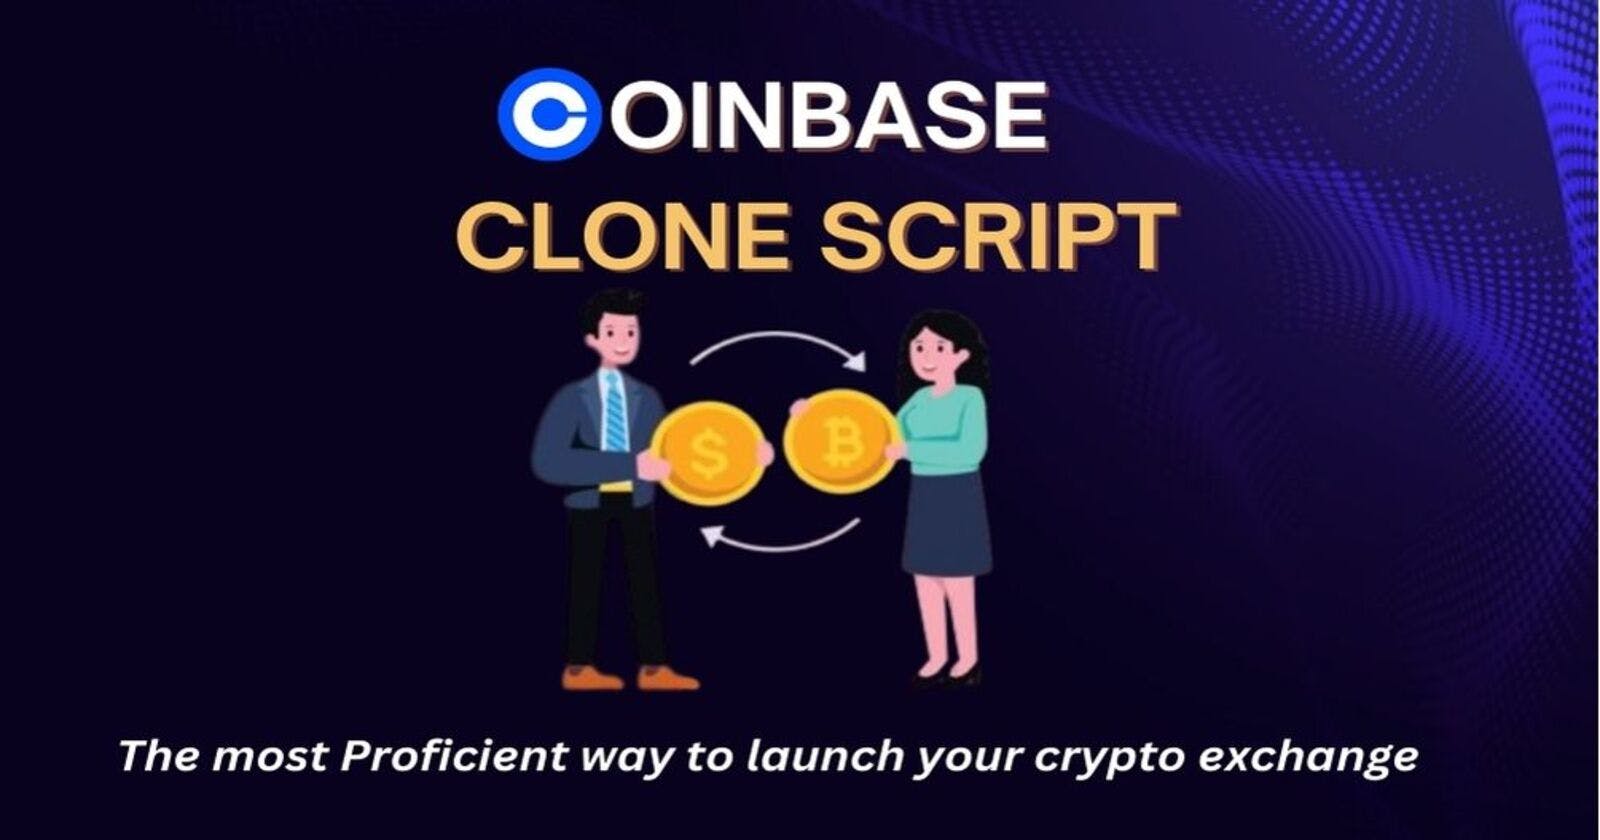 Coinbase clone script - The most Proficient way to launch your crypto exchange